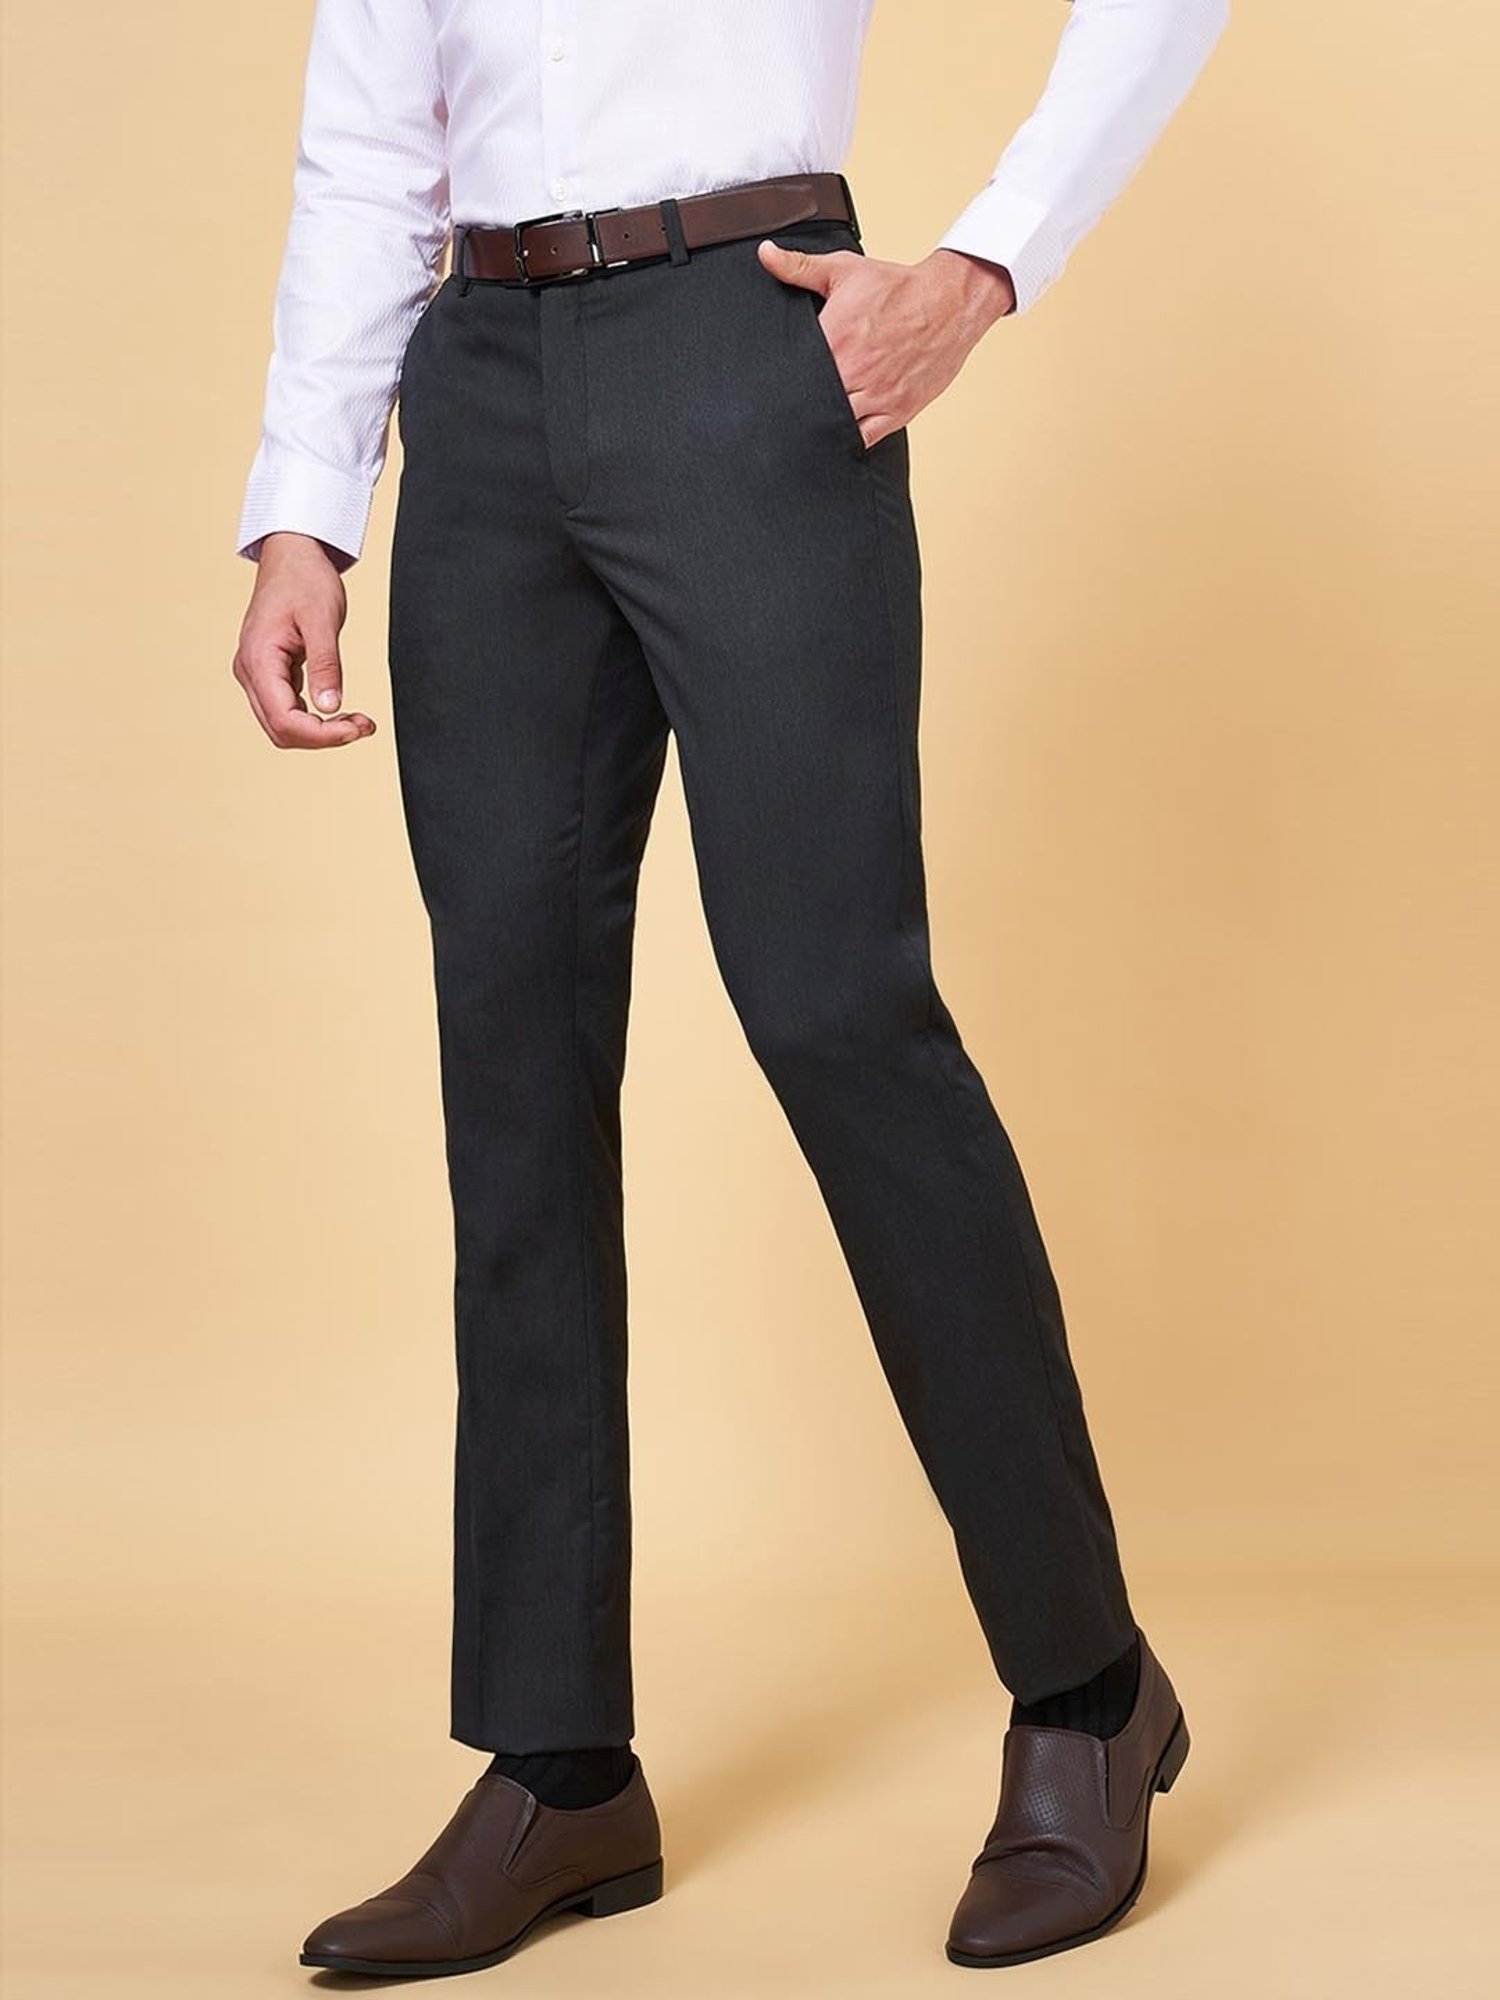 Formal 4 way Stretch Trousers in Charcoal Grey Slim Fit